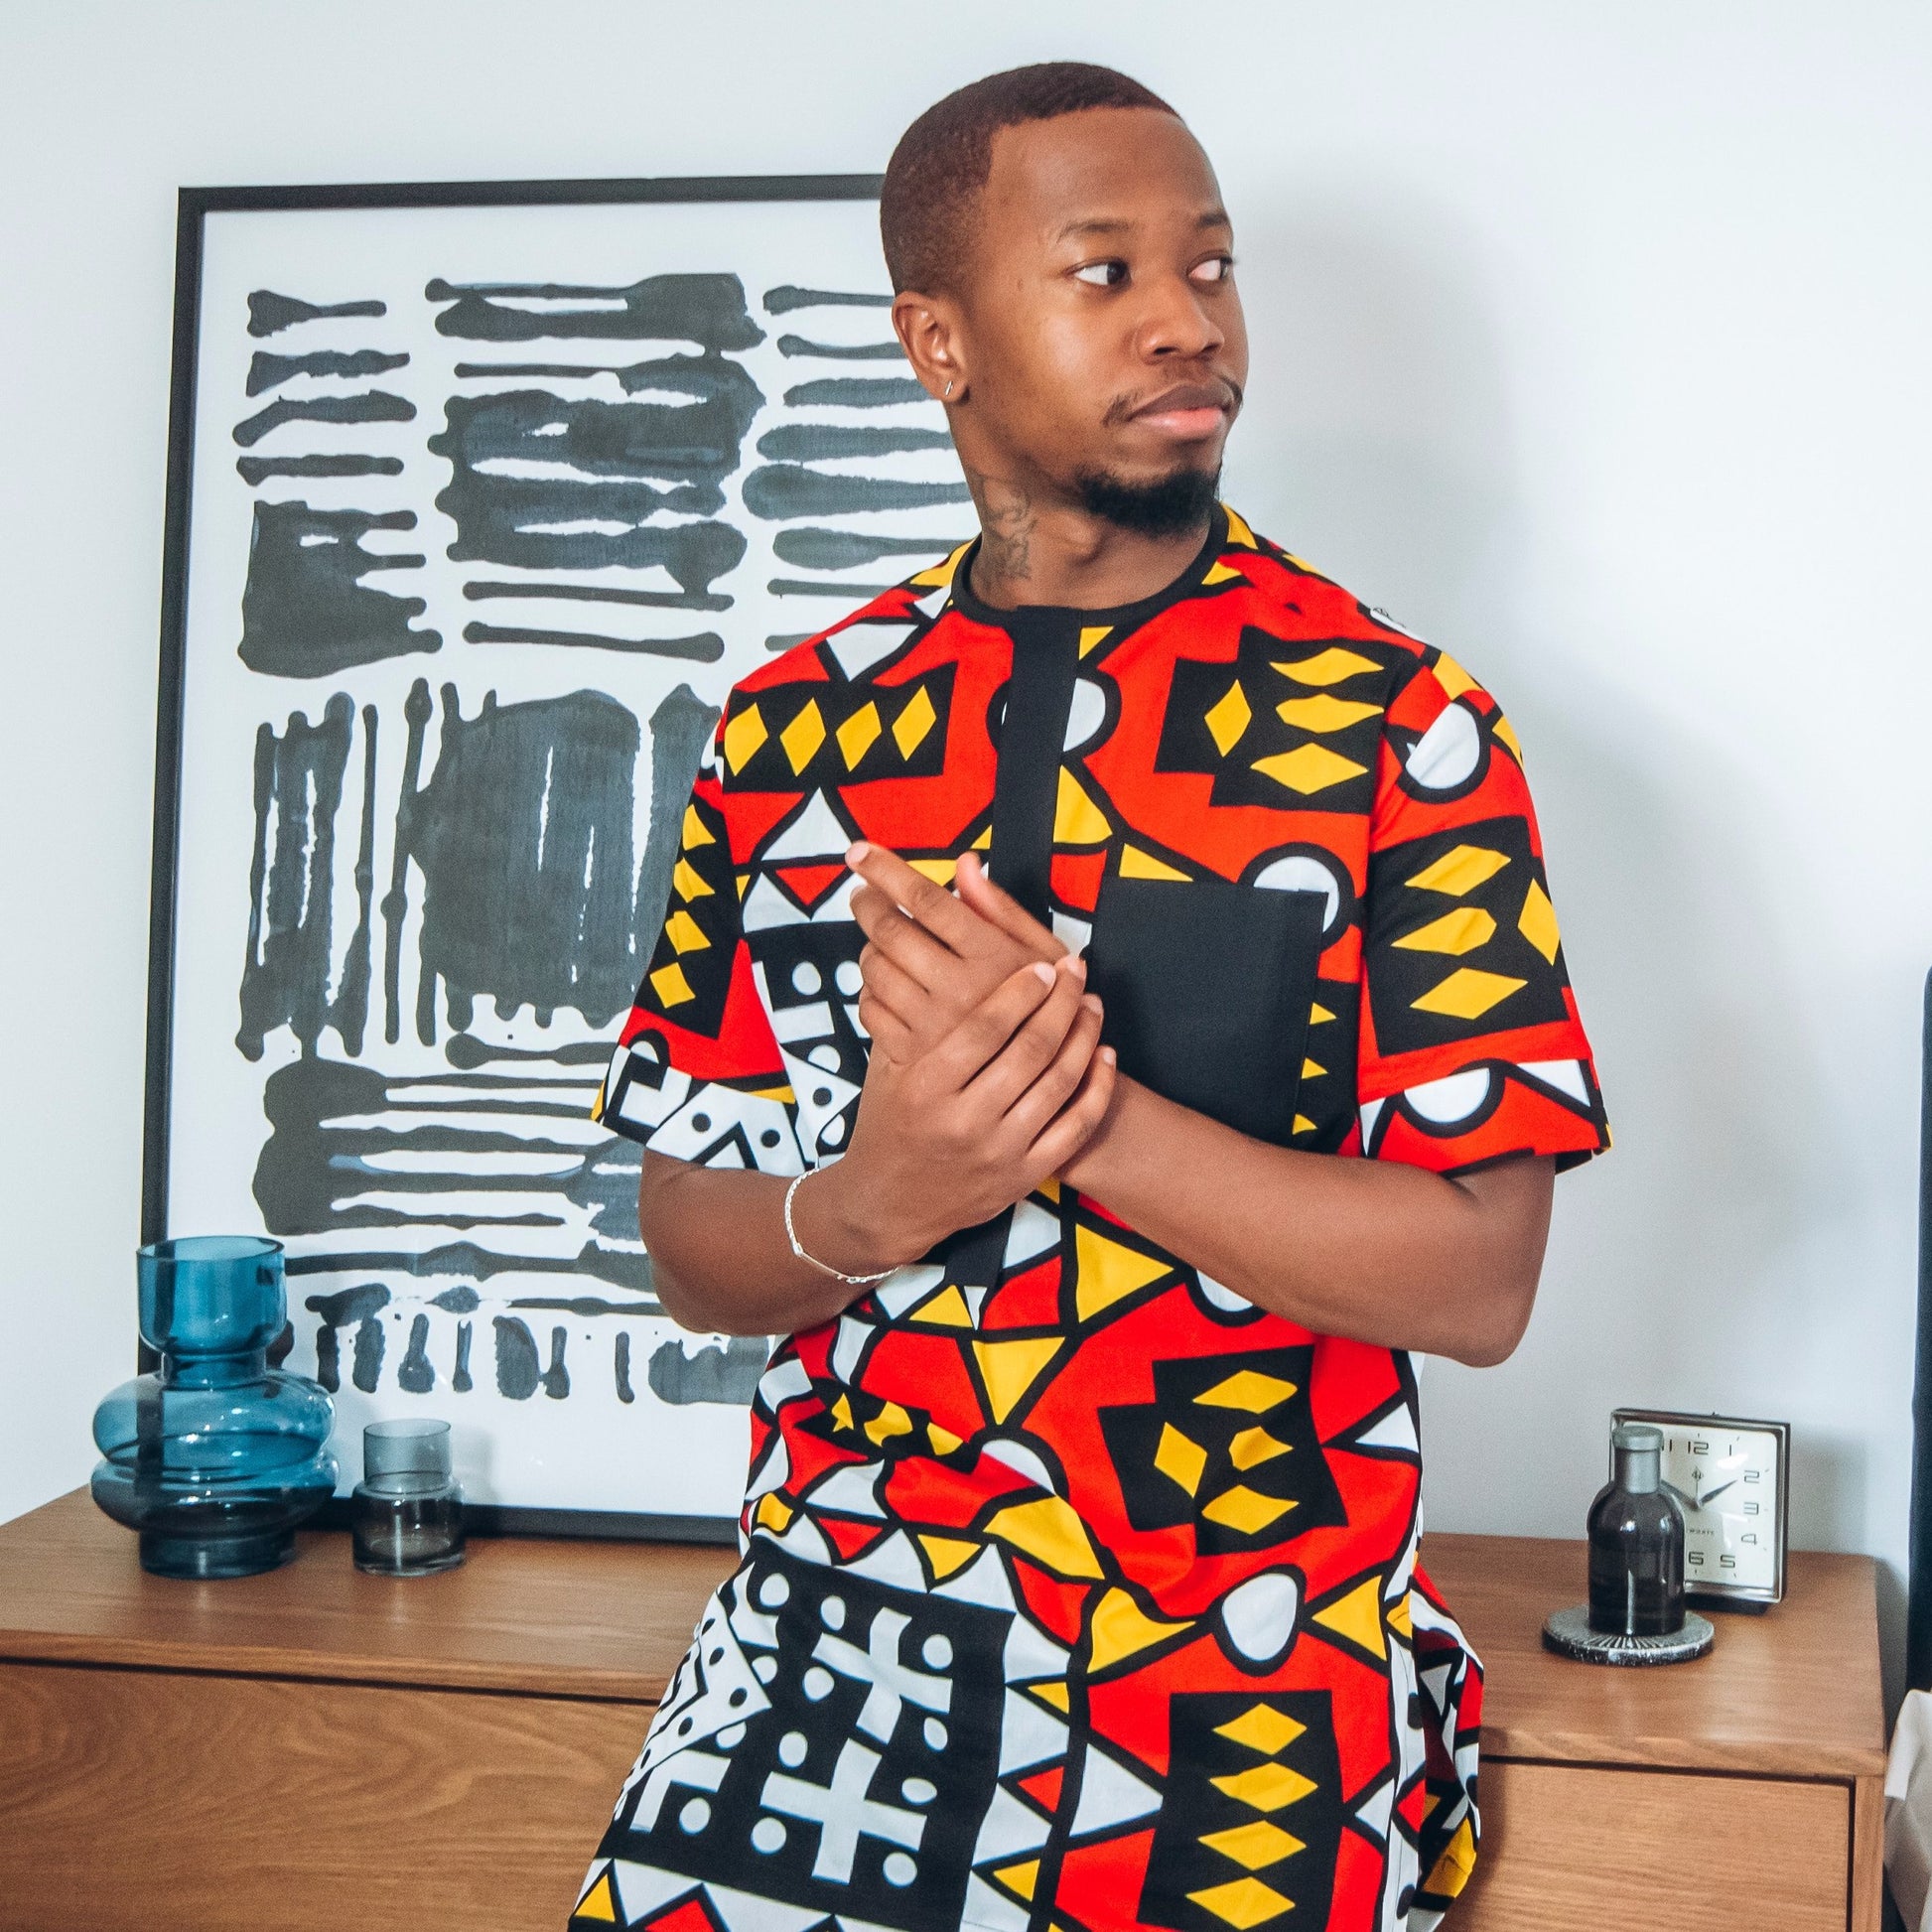 Black man in short sleeved African print kaftan in red, black, white and yellow pattern